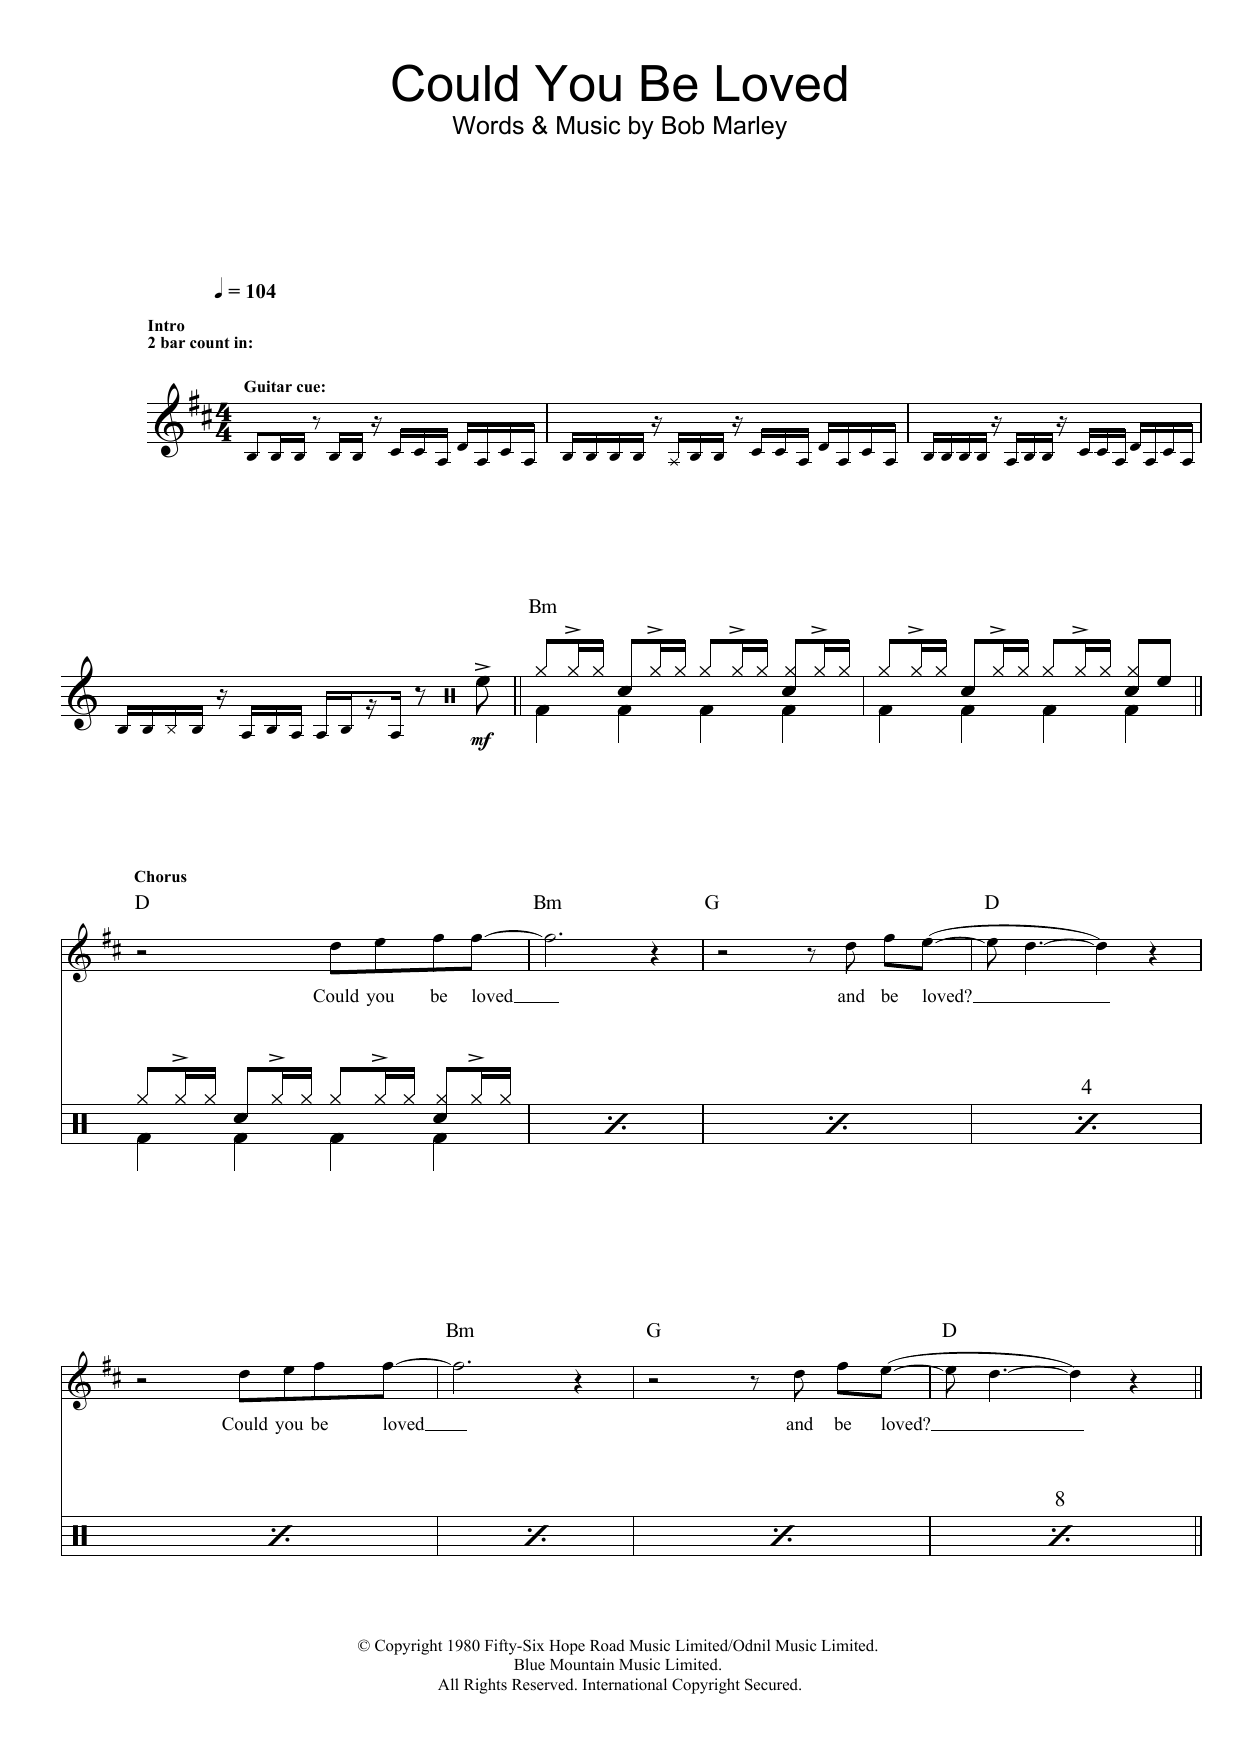 Download Bob Marley Could You Be Loved Sheet Music